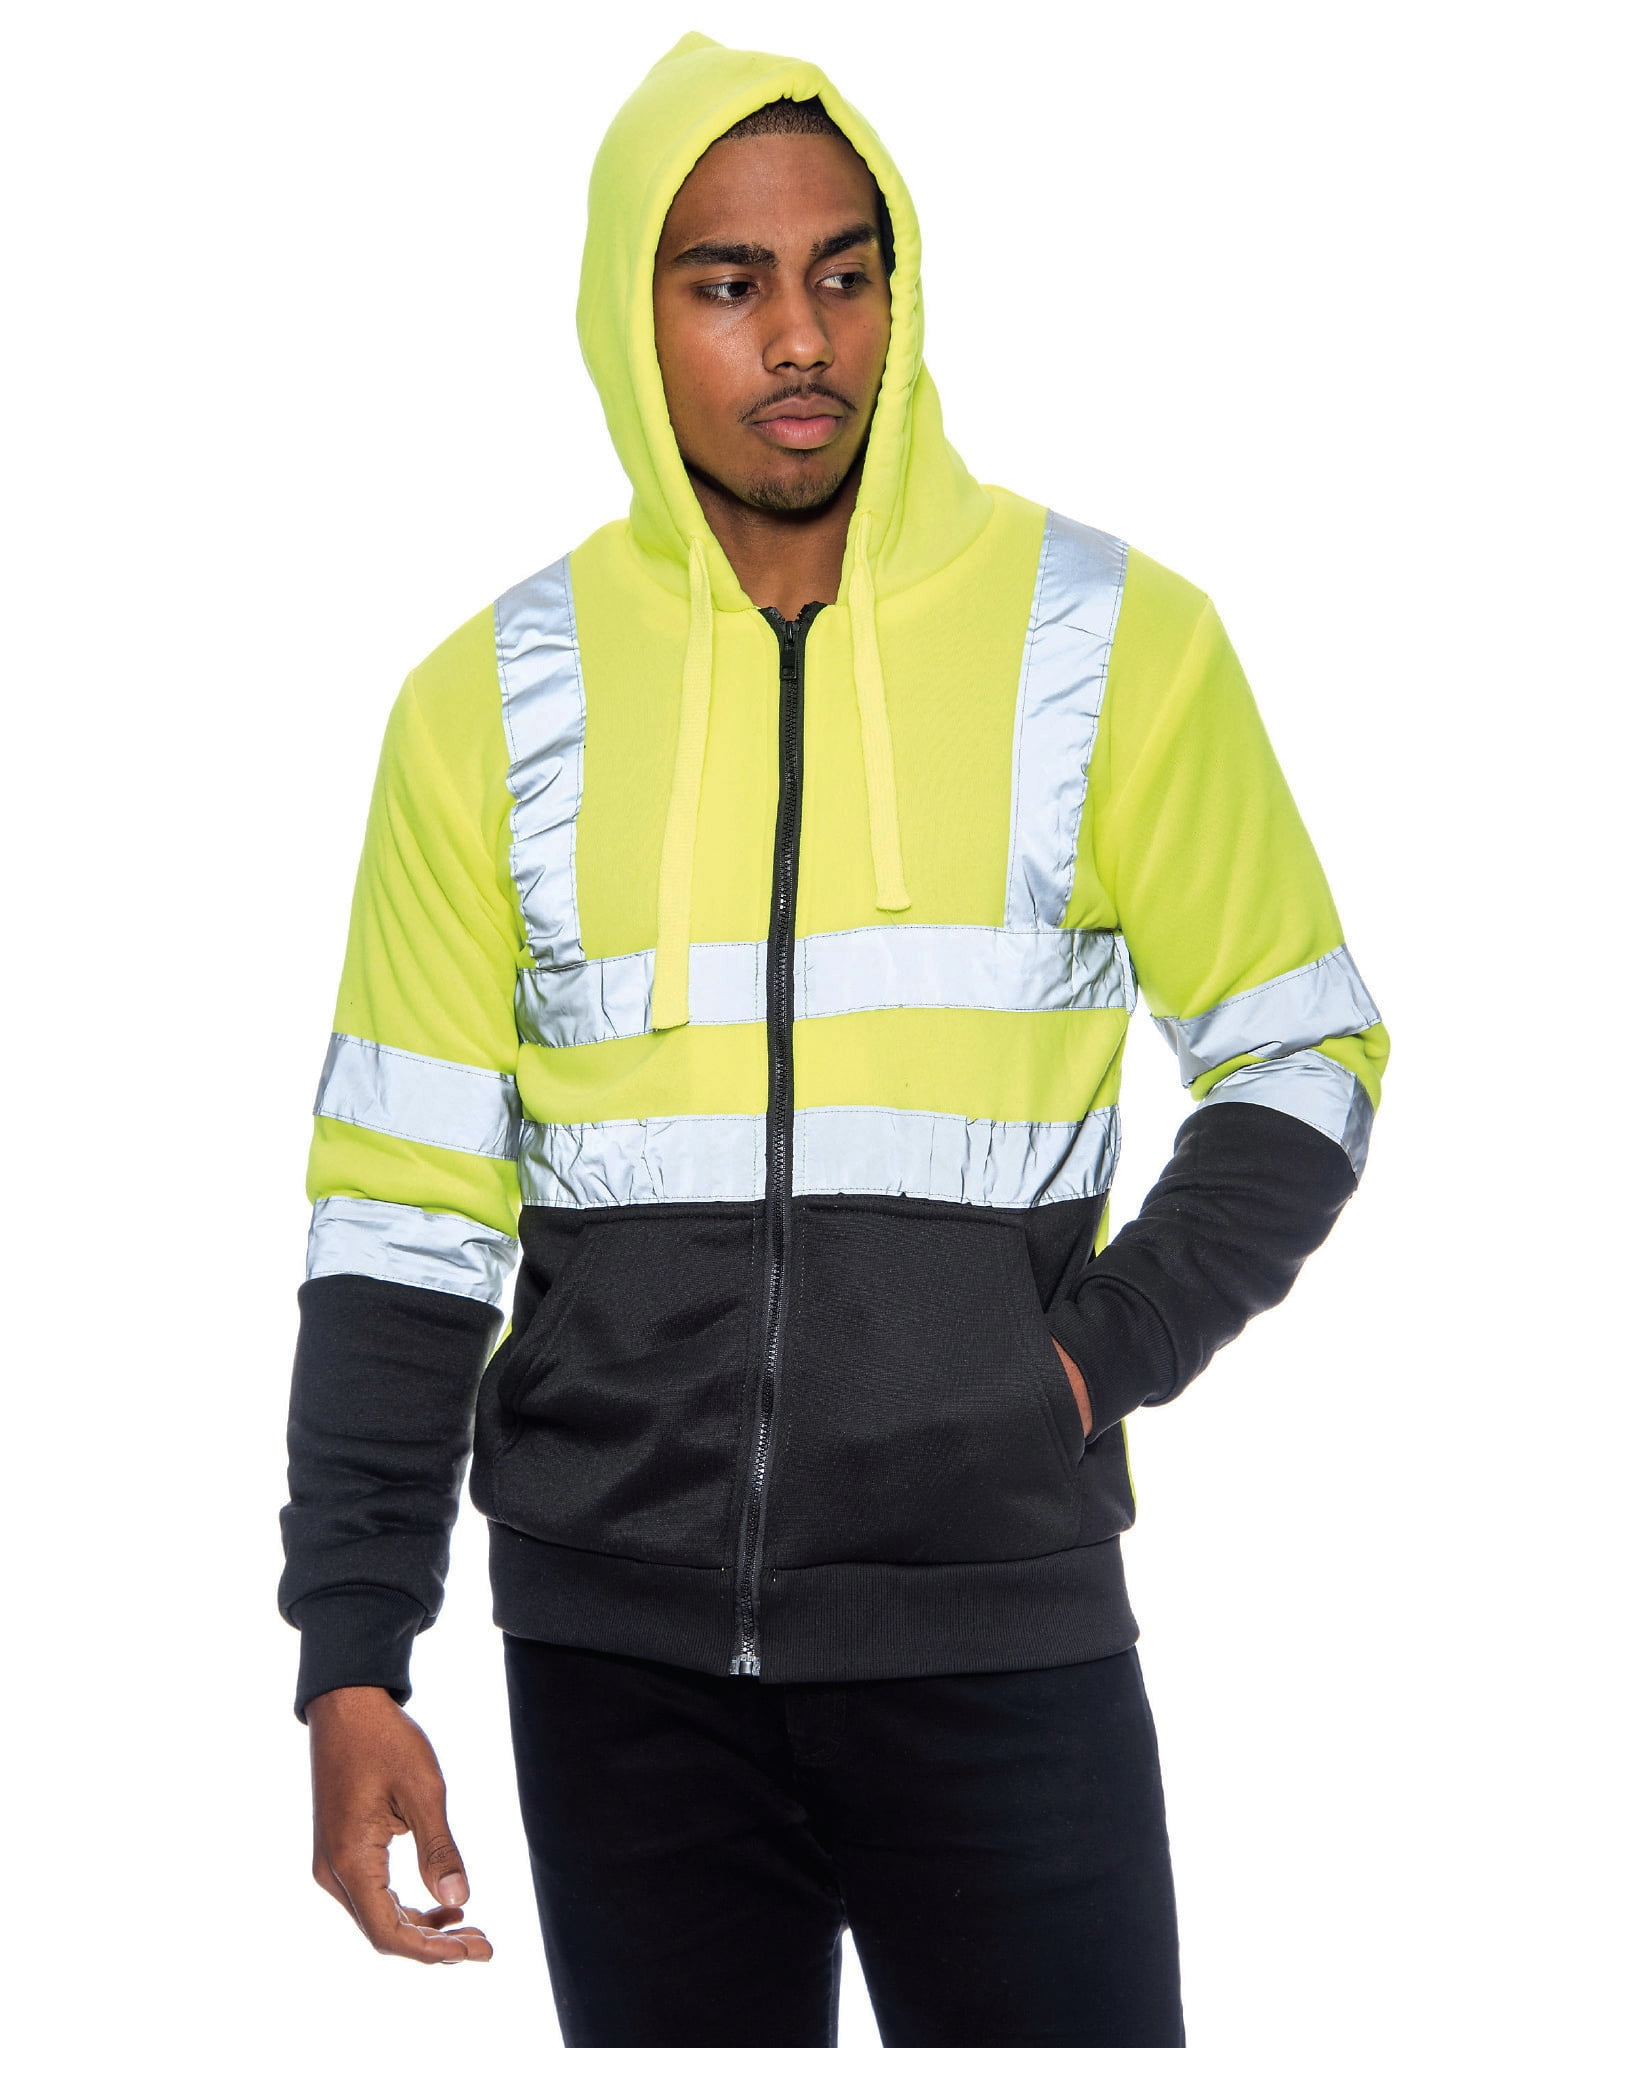 Vekdone Safety Reflective Jacket for Men High Visibility Work Reflective Construction Jackets Waterproof Hoodie with Pocket, Men's, Size: XL, Yellow